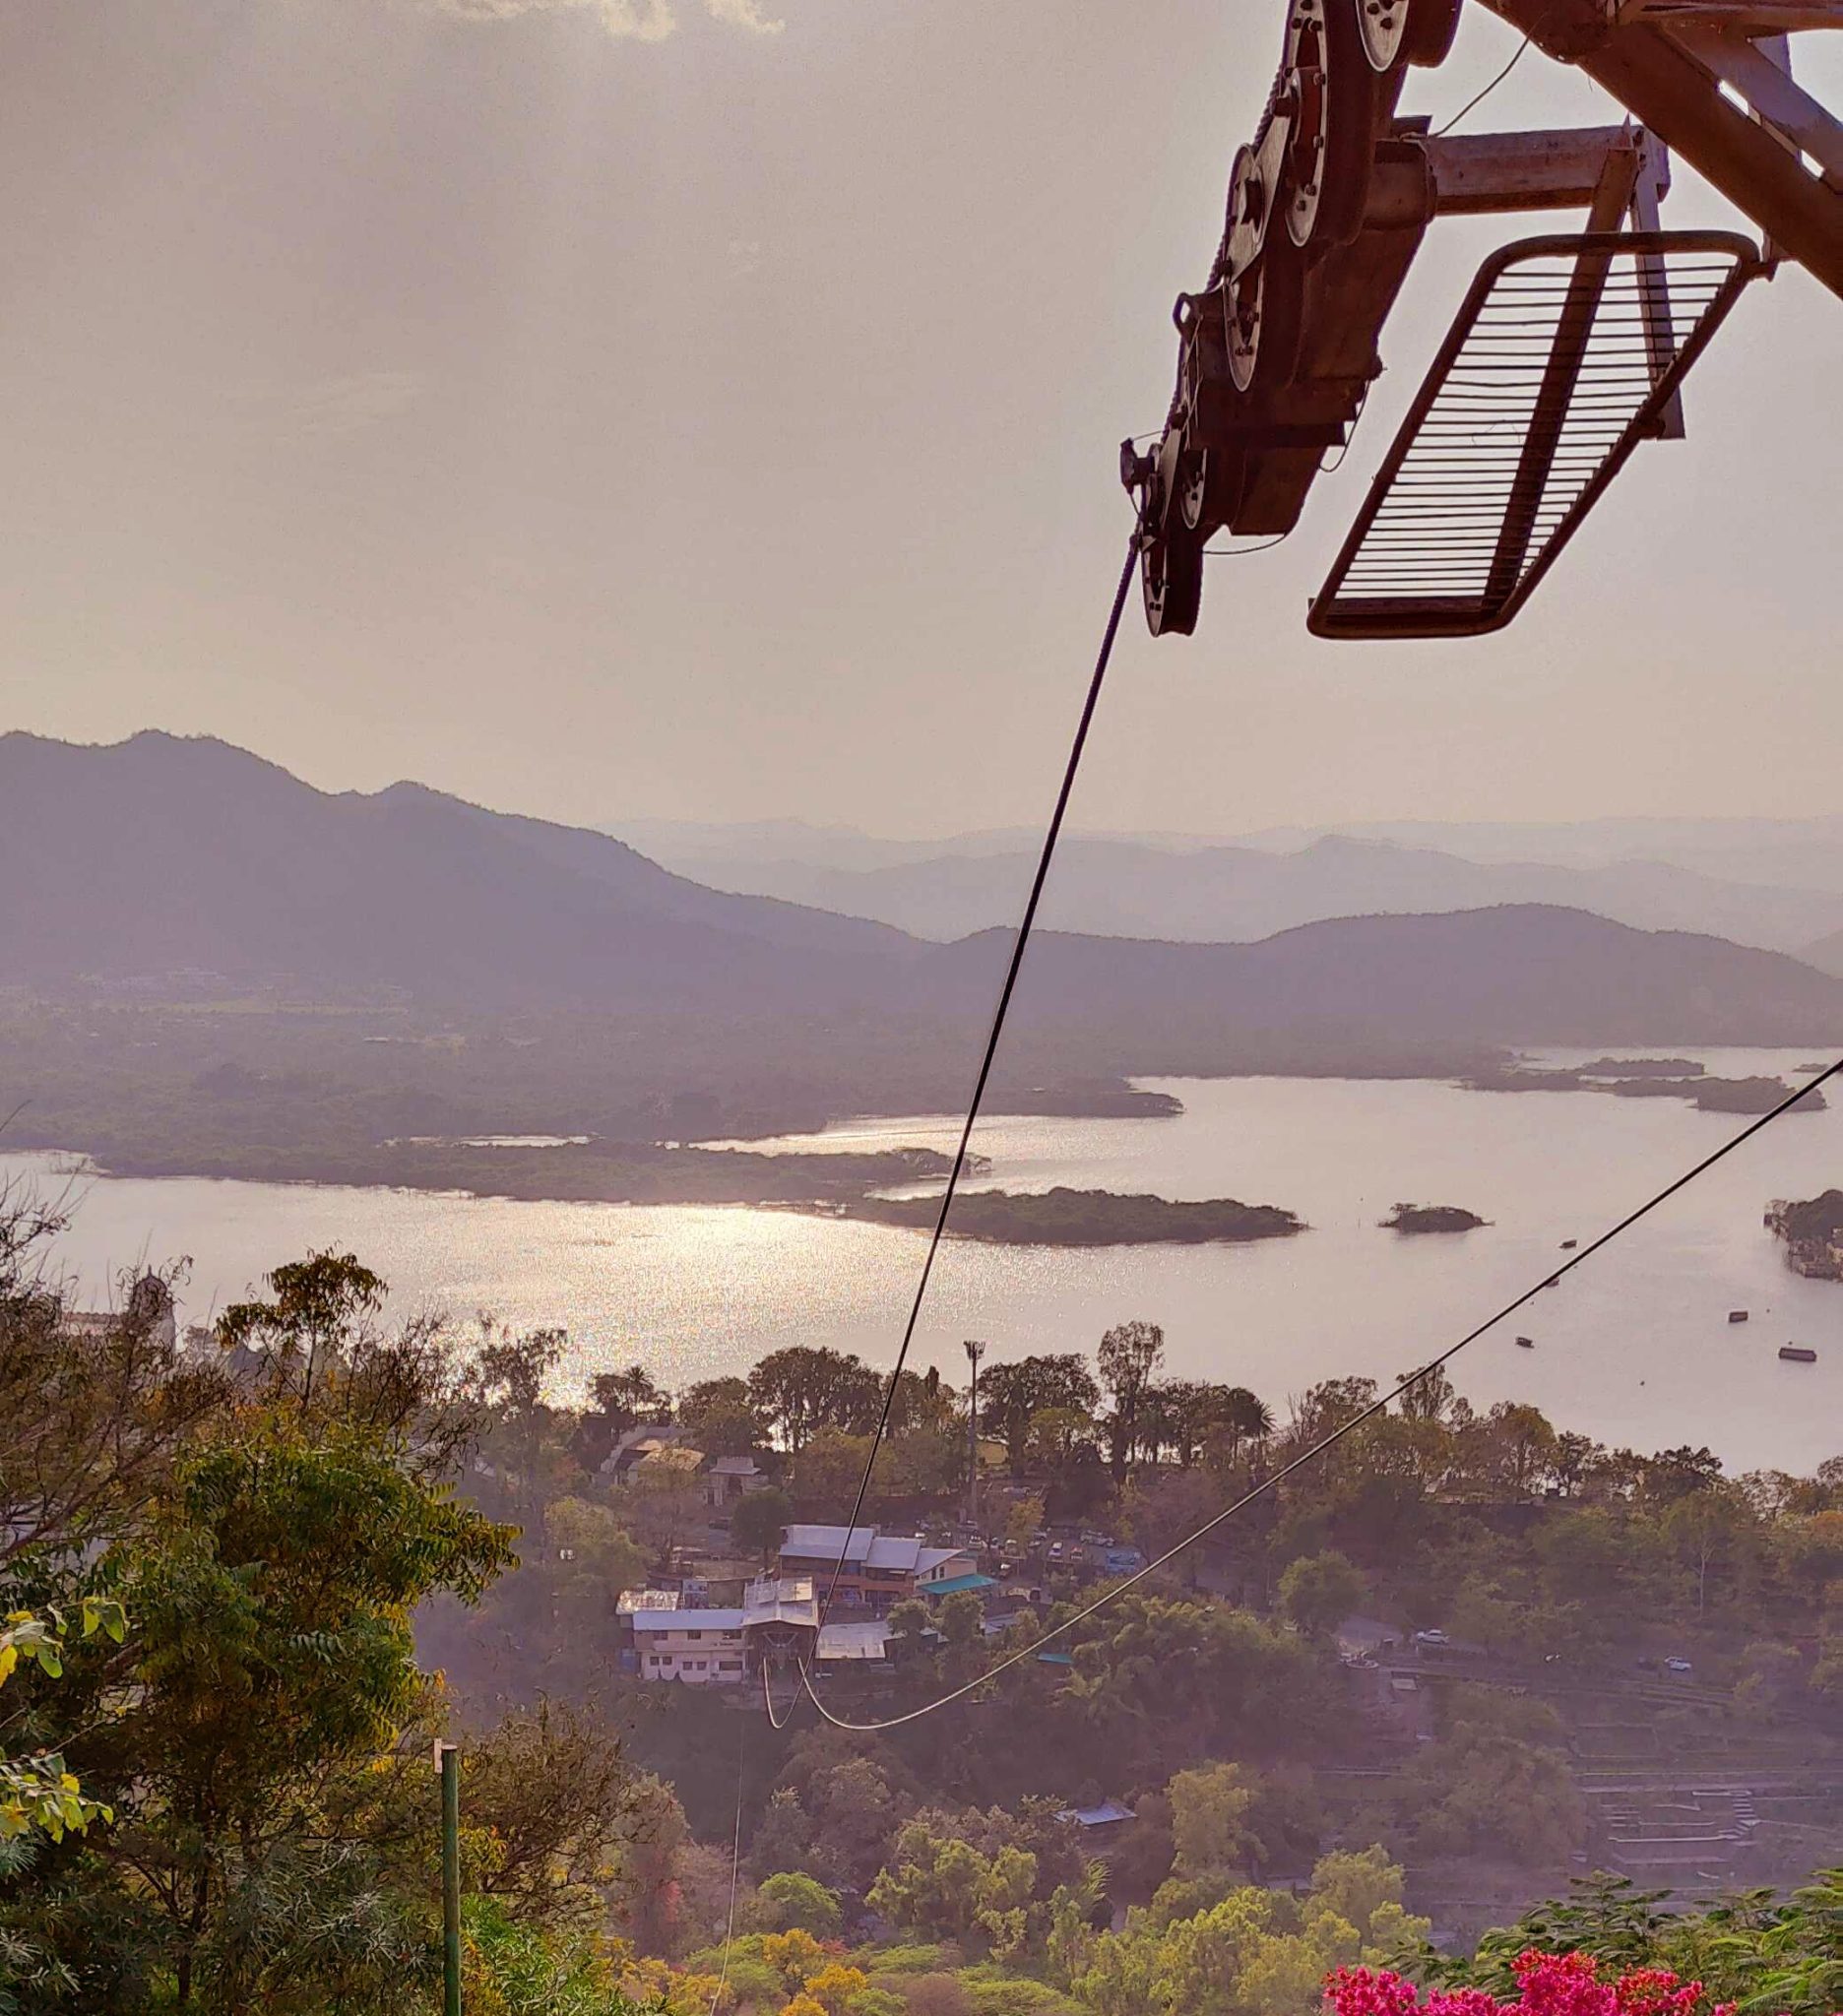 Captivating view from heights of a ropeway